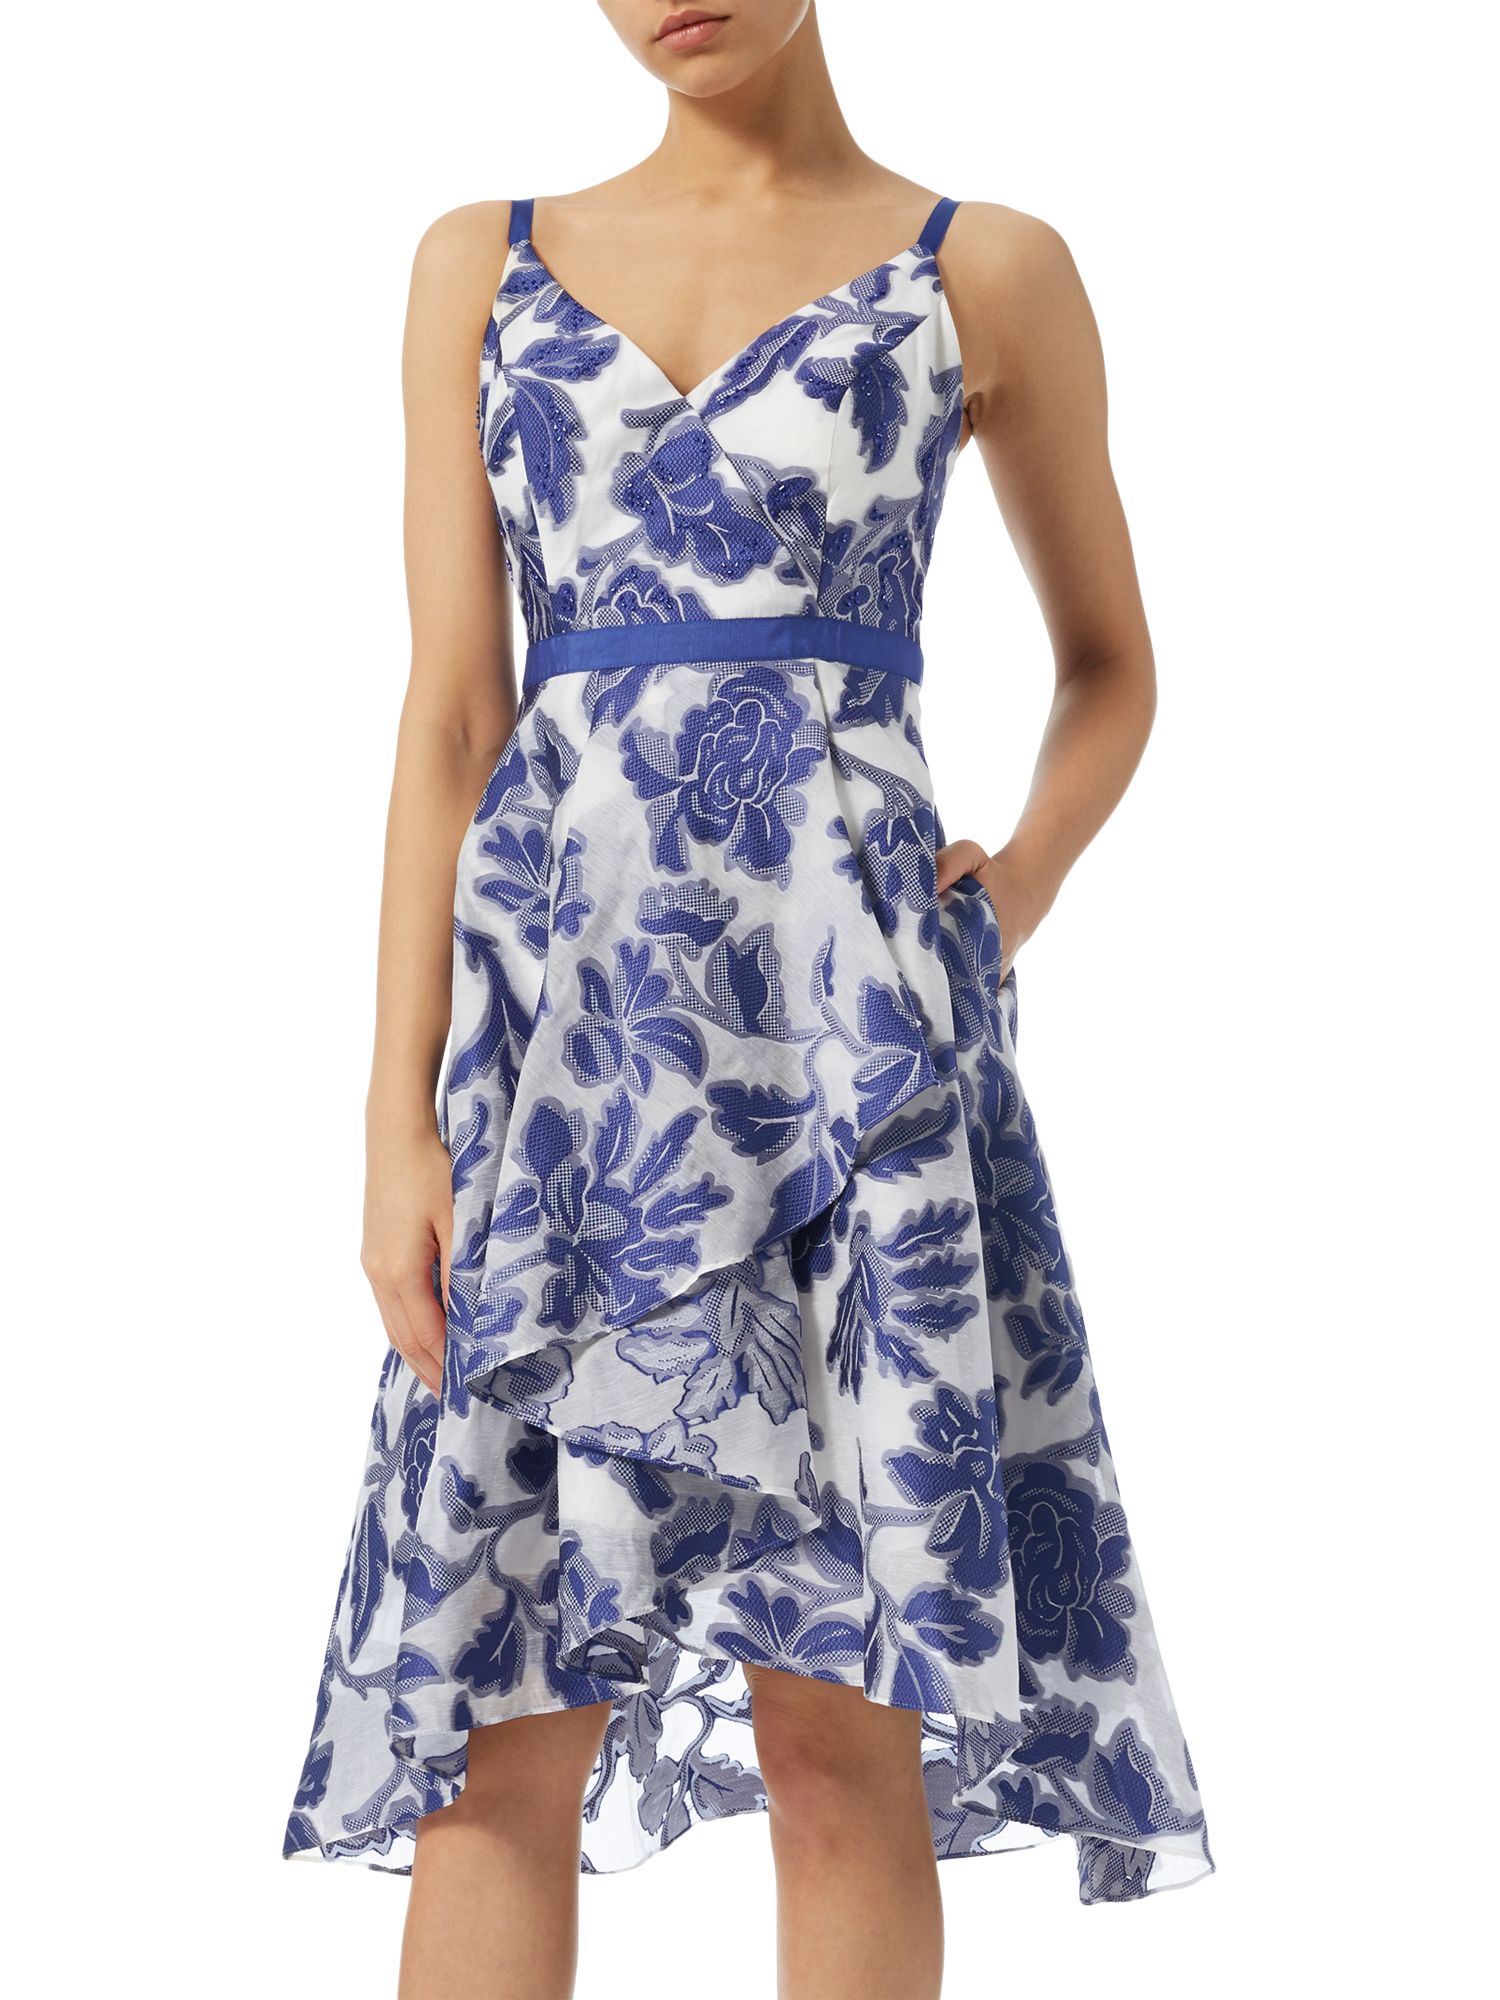 Adrianna Papell Burnout Jacquard Fit And Flare Dress, Royal Blue/Ivory